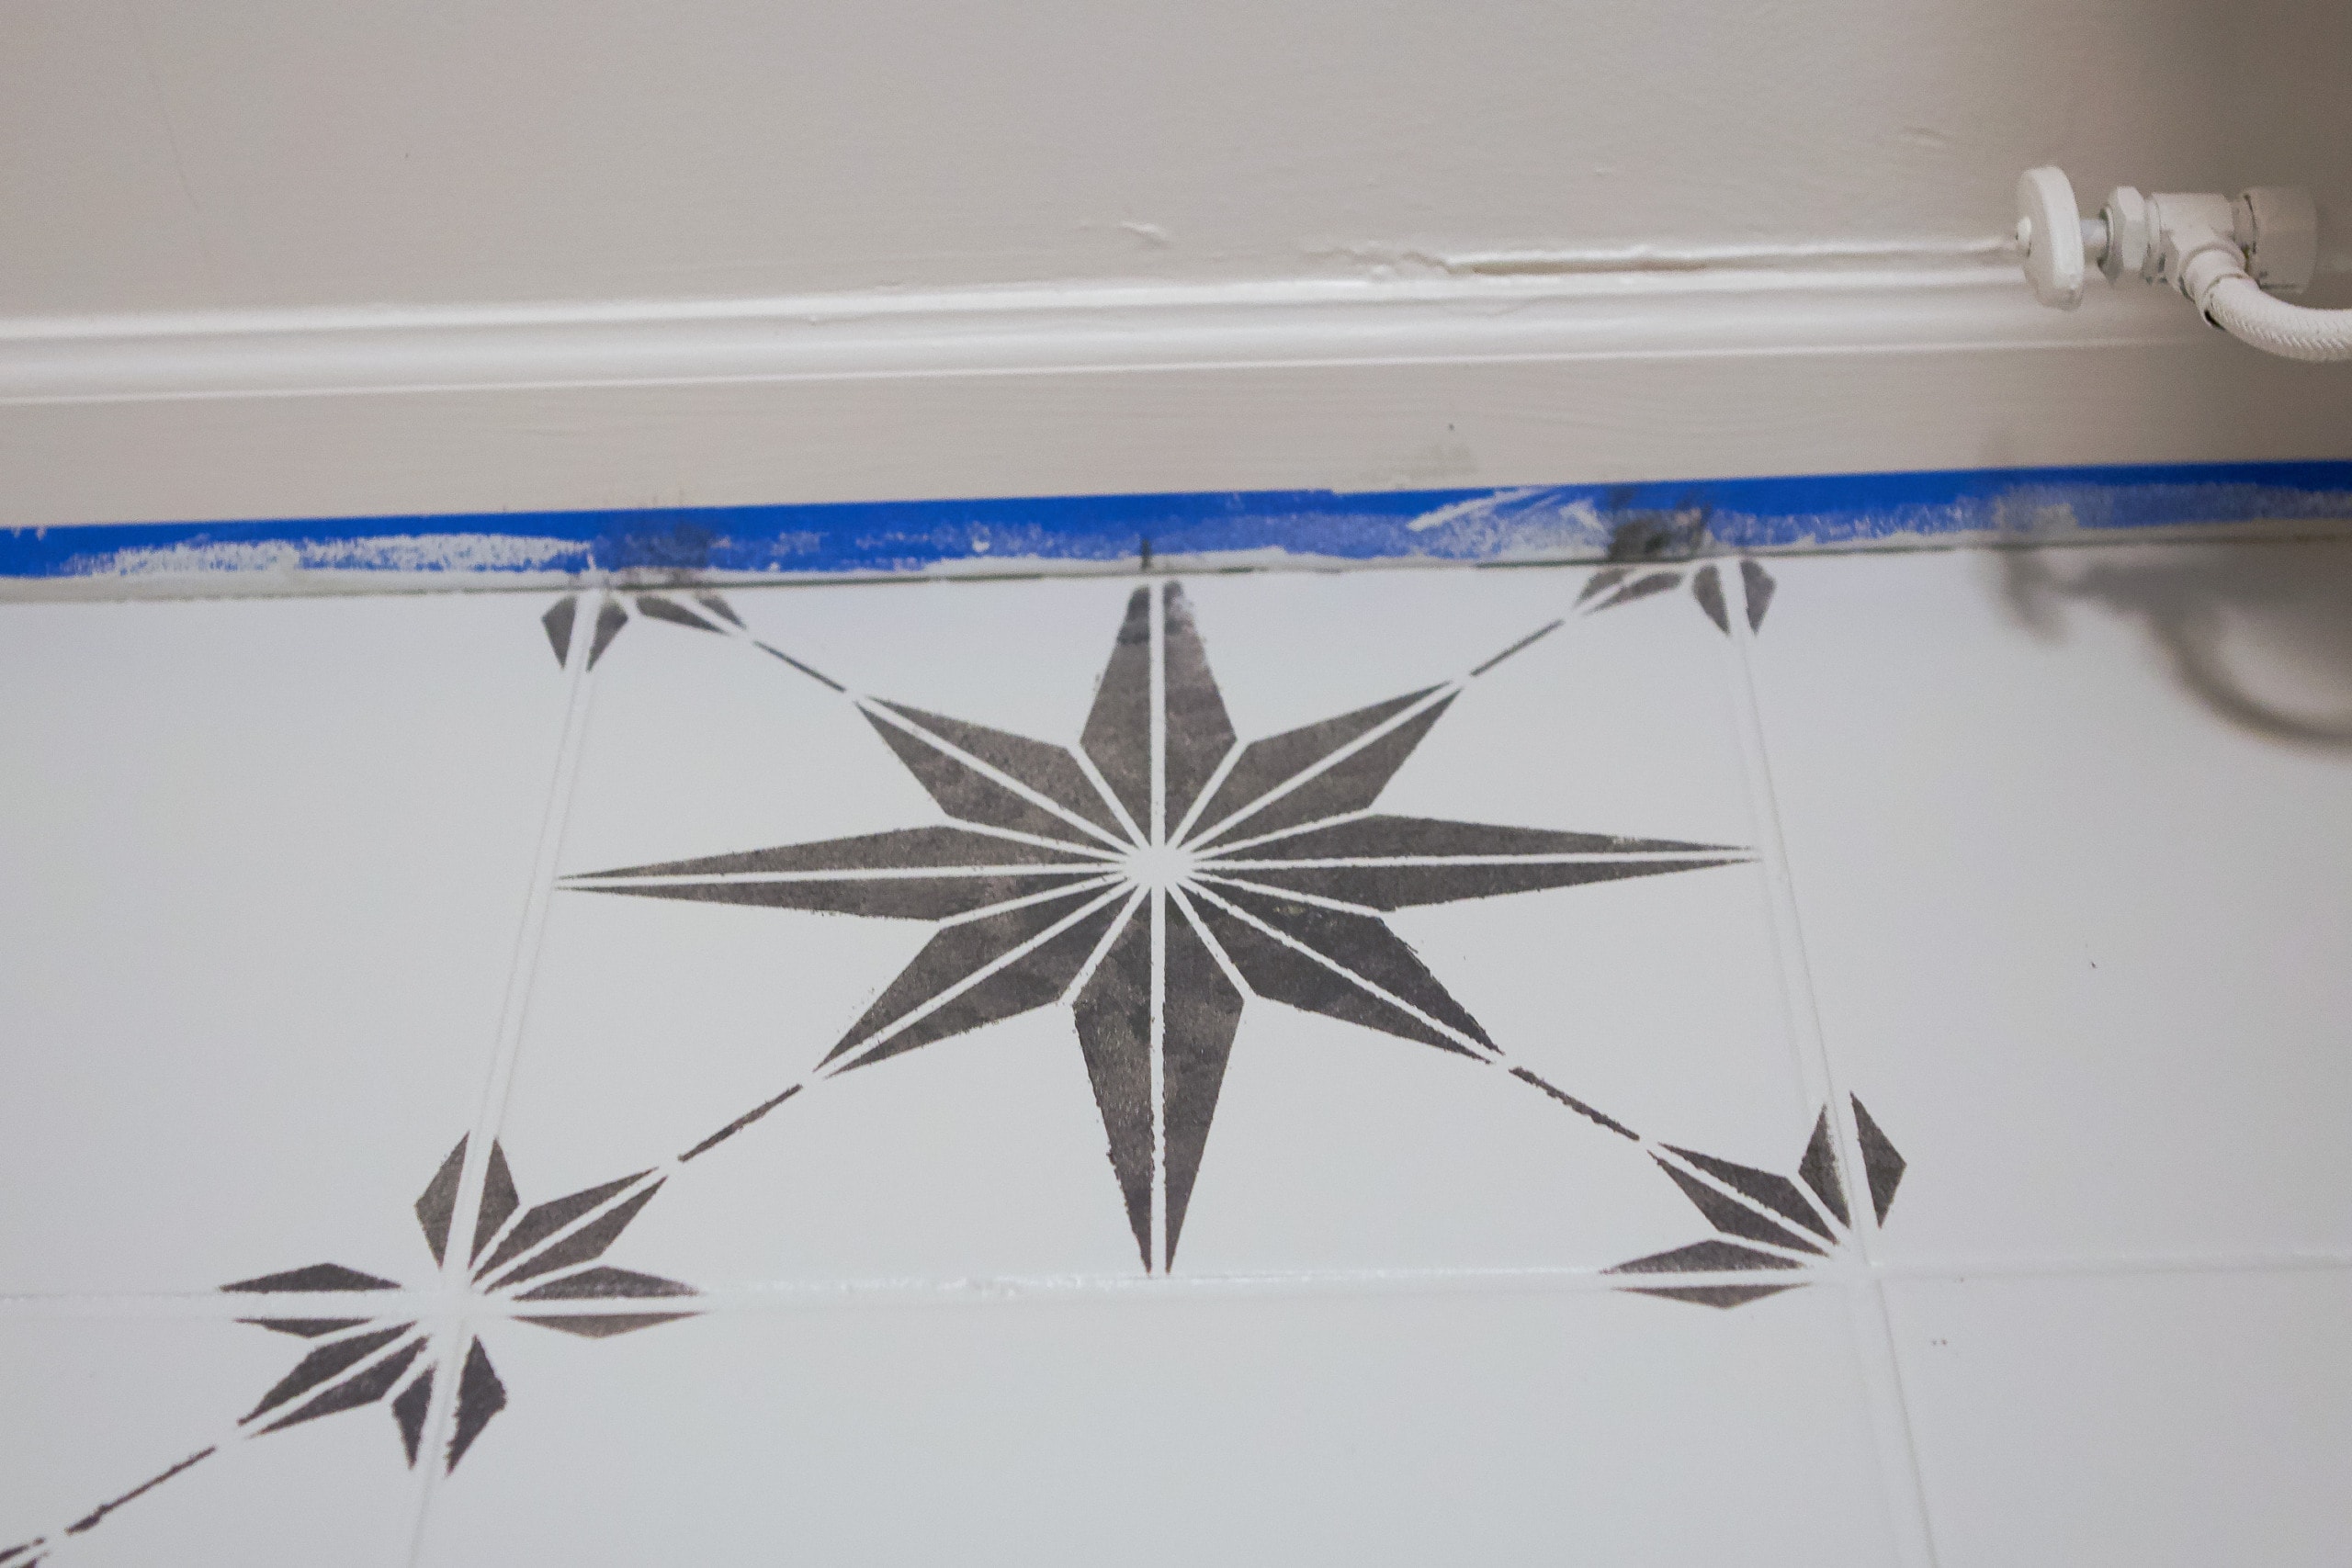 You don't need to use much paint when stenciling